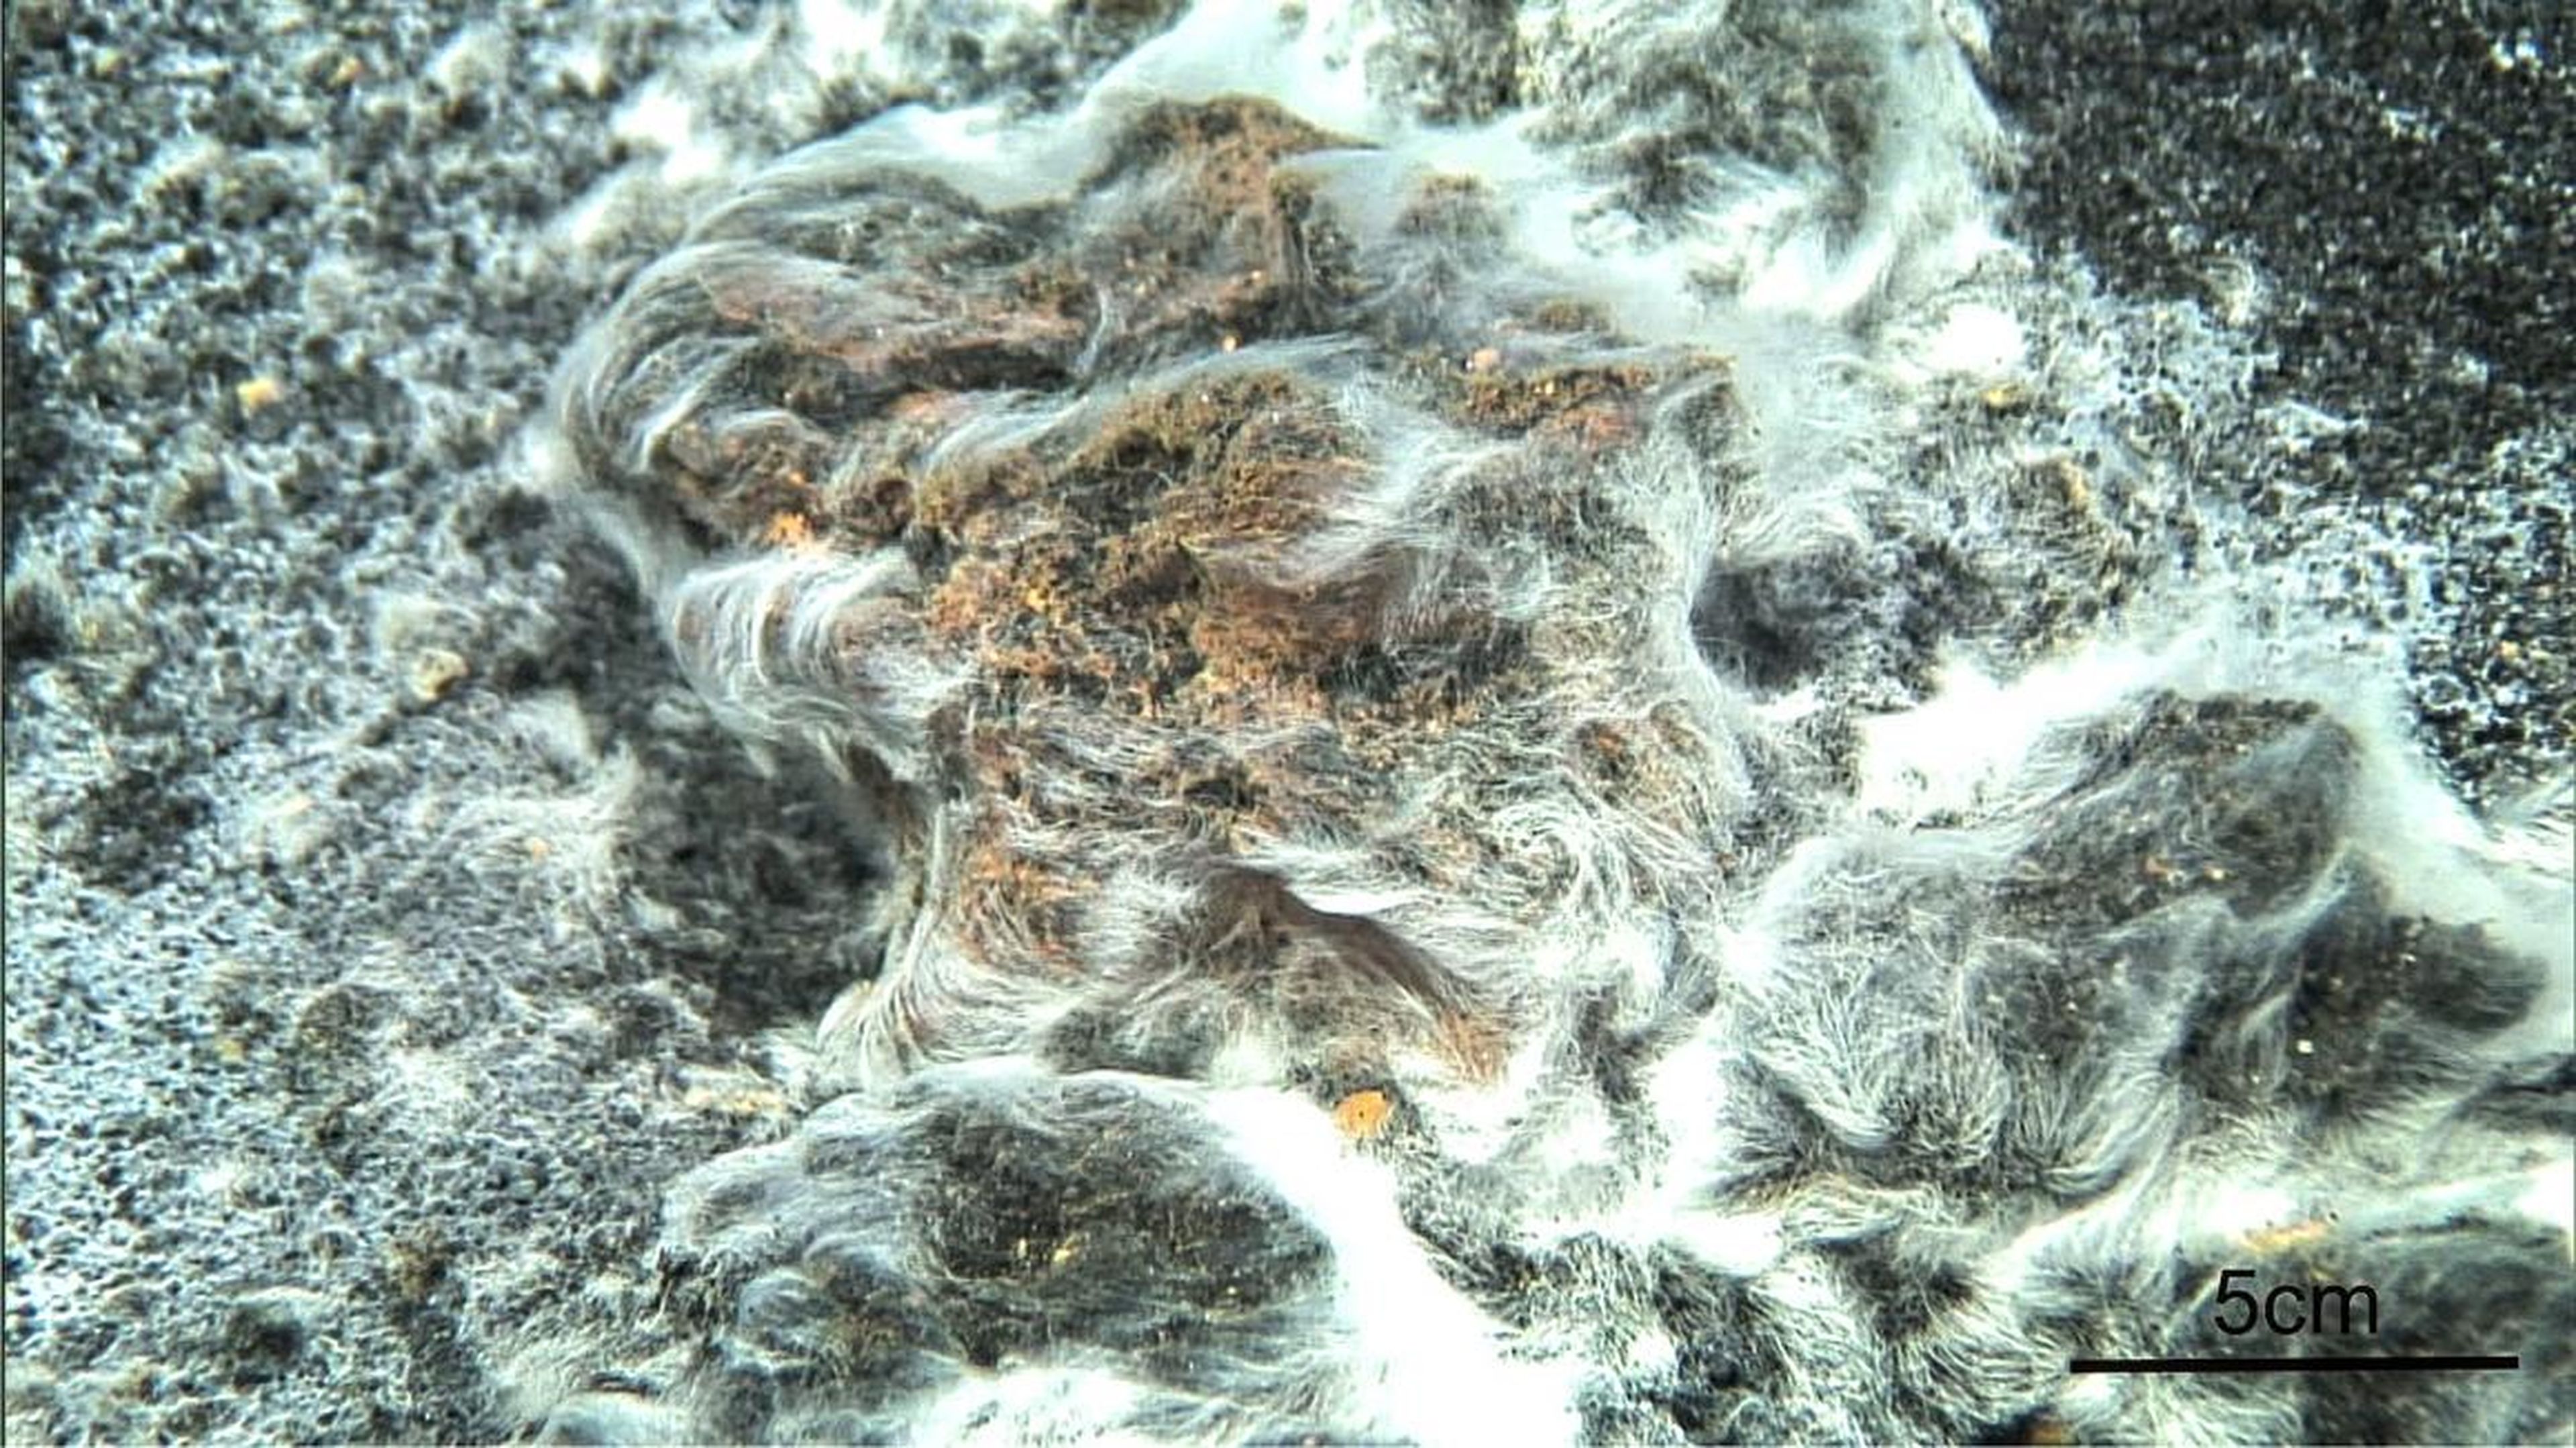 A colony of <em>Thiolava veneris</em> first appeared after a volcanic eruption in the Canary Islands.